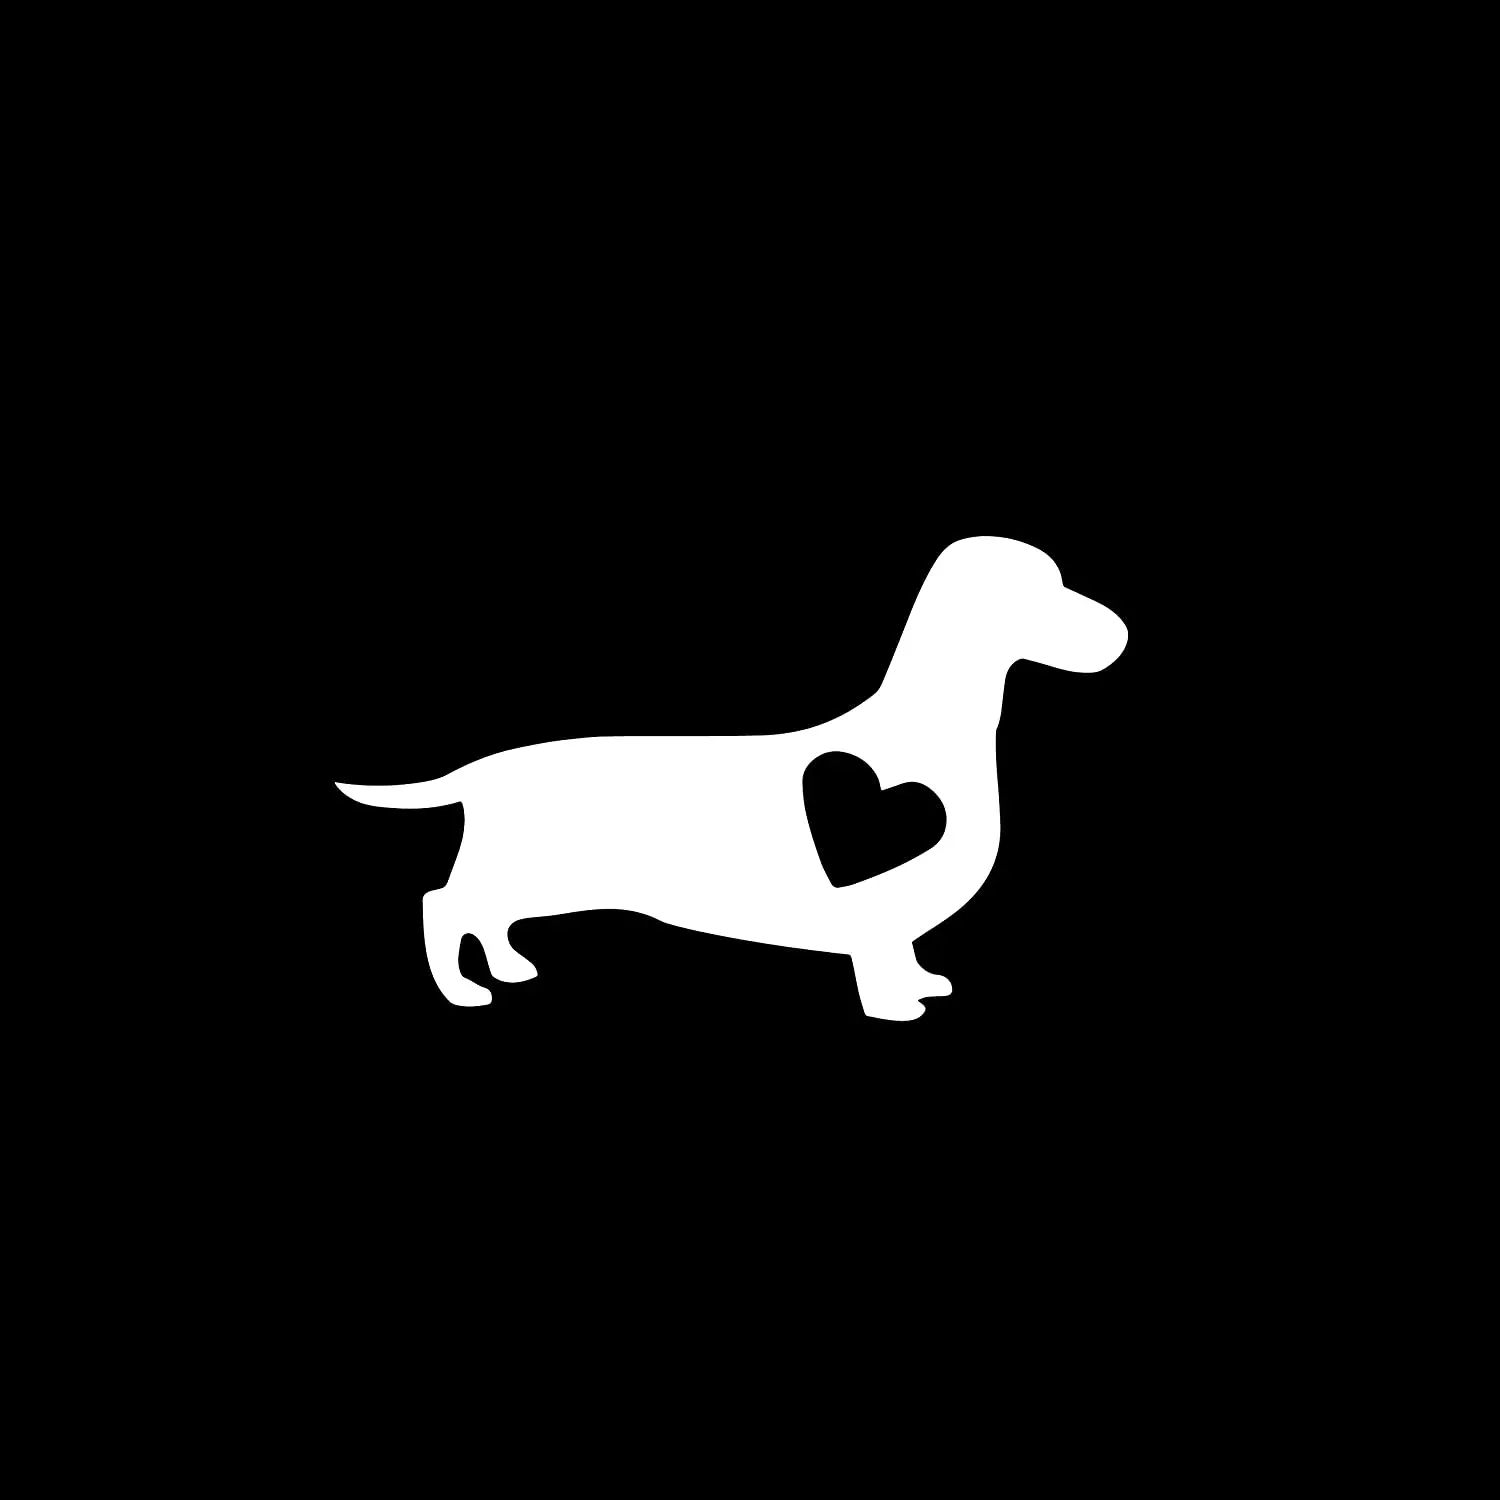 

Dachshund Love Vinyl Decal Car Sticker Windshield Bumper Motorcycle Helmet Decal High Quality Cover Scratches Waterproof PVC